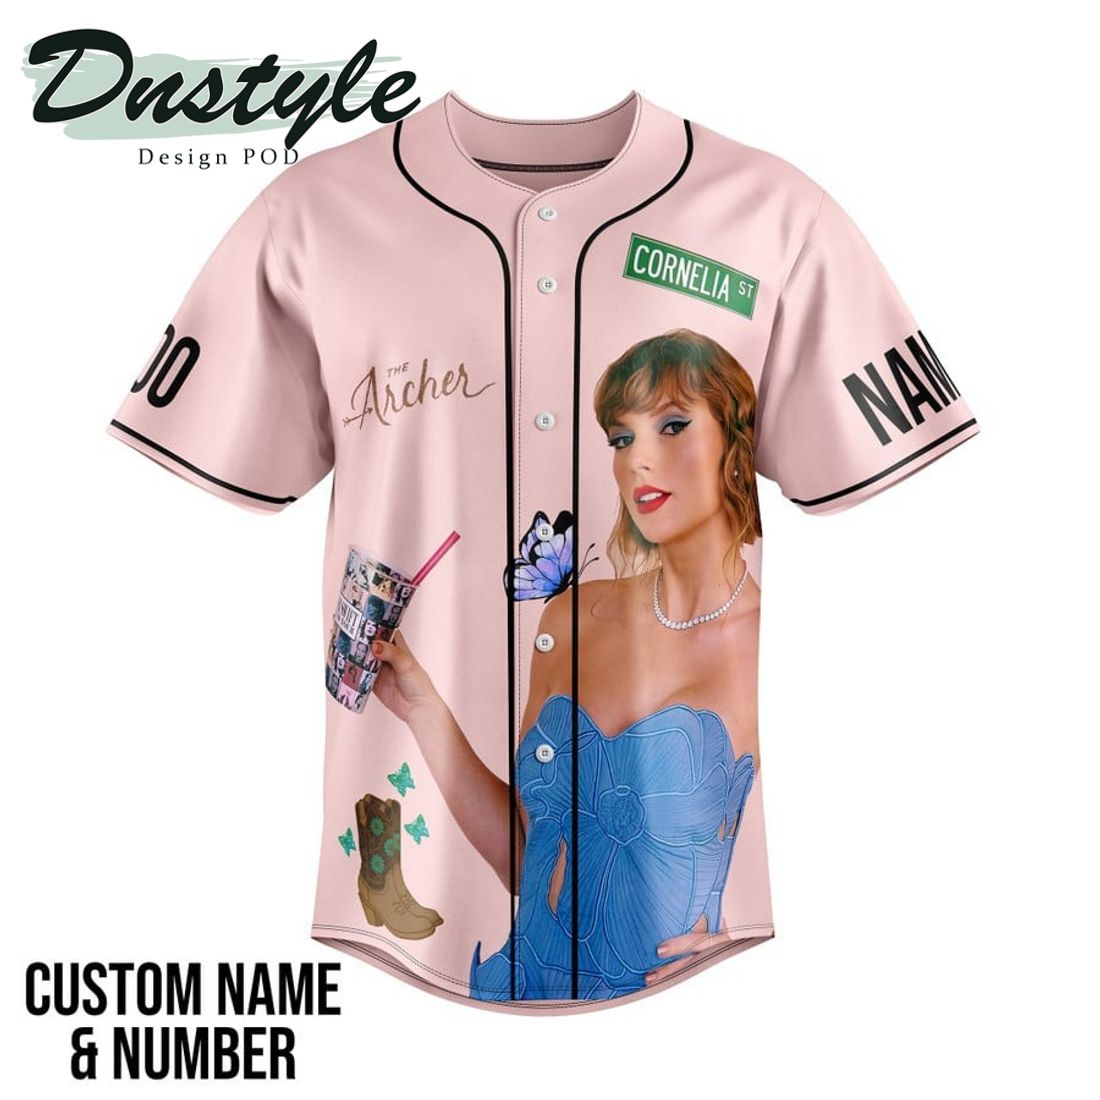 Taylor Swift The Eras Tour Custom Name And Number Baseball Jersey